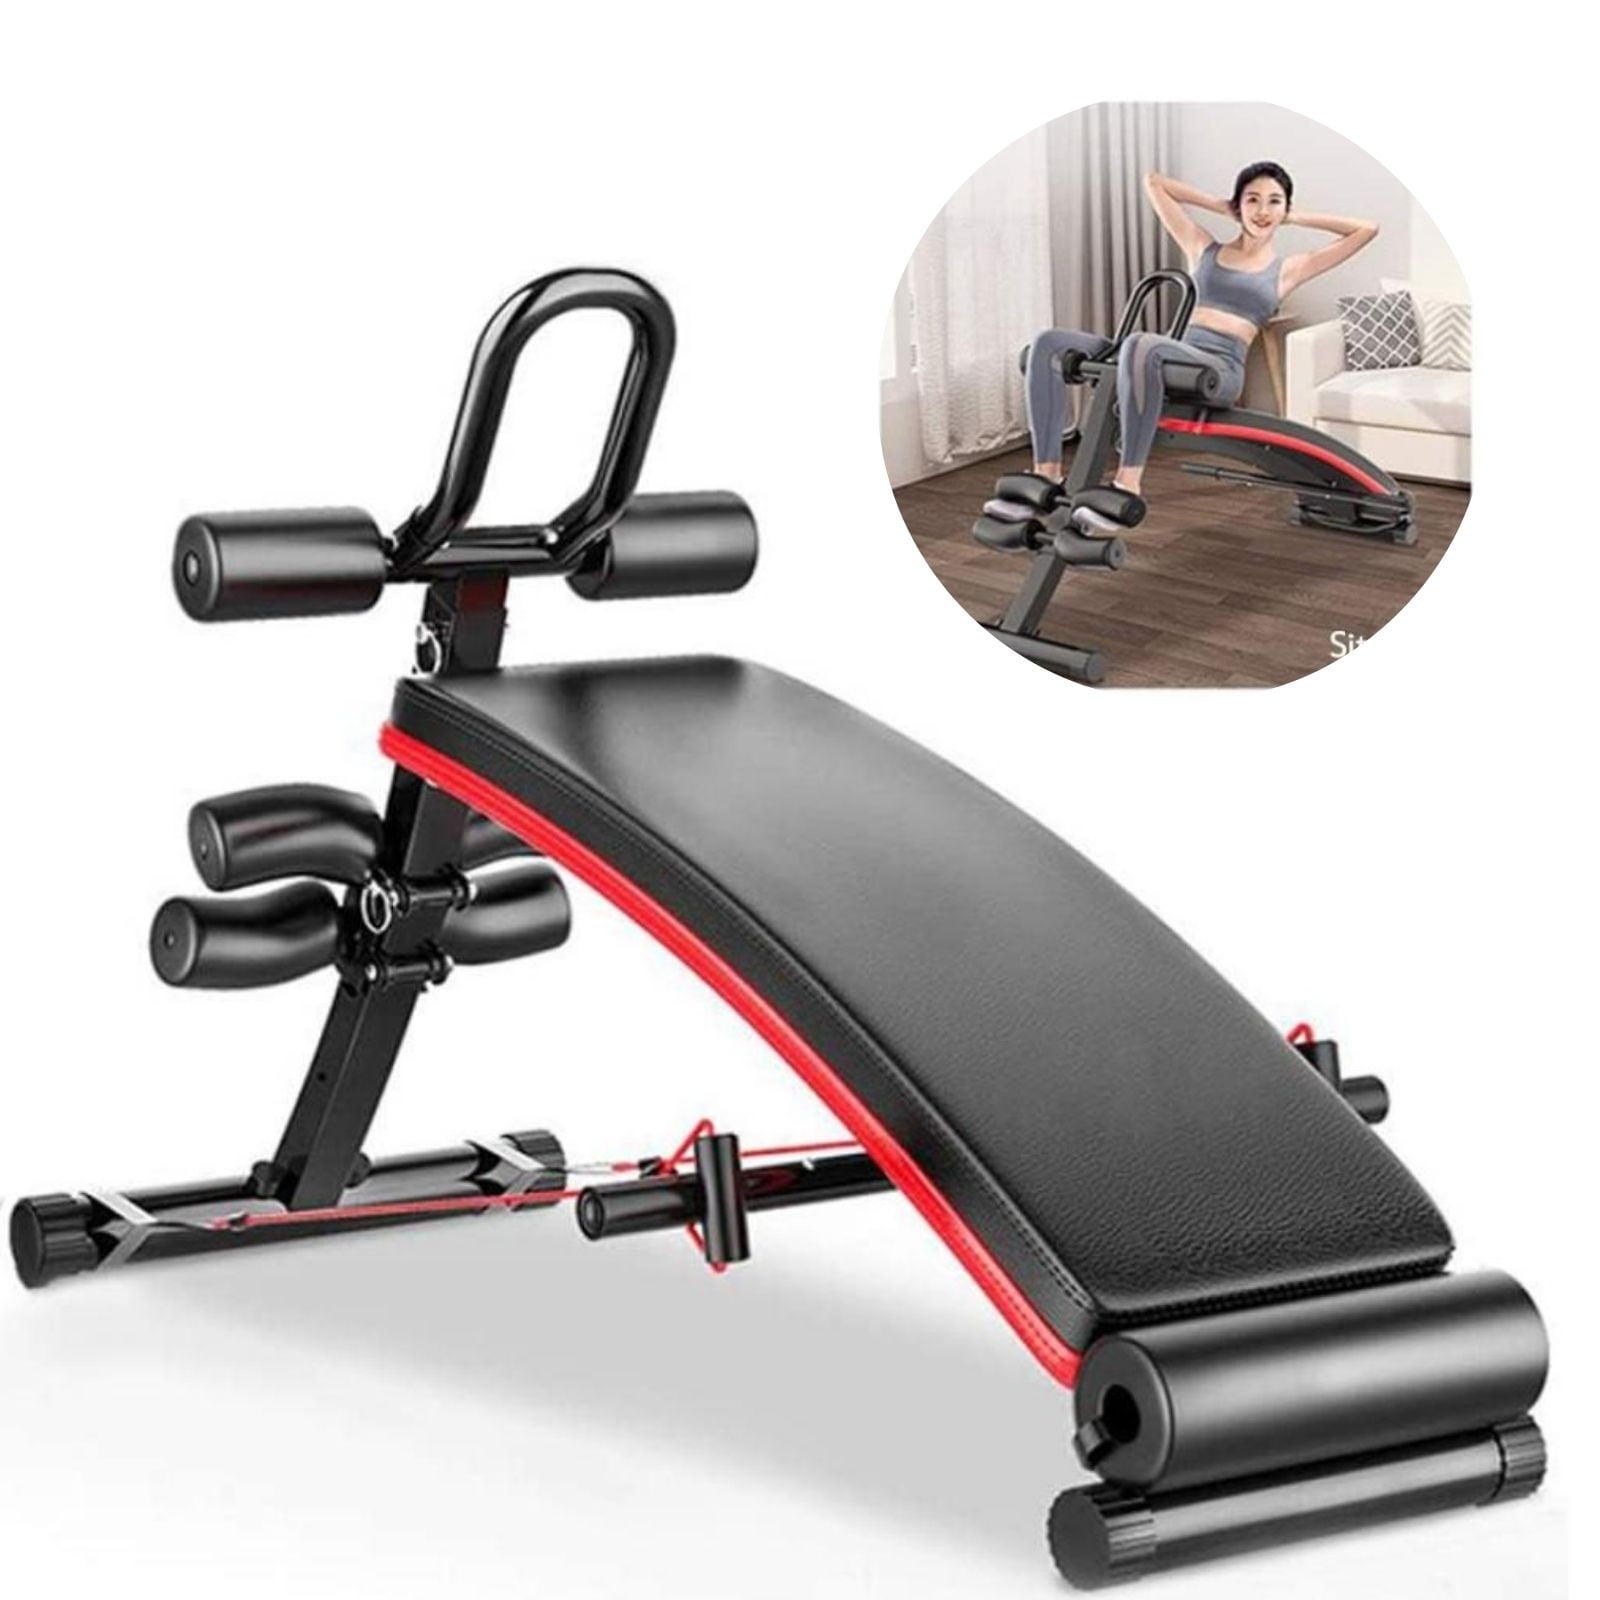 Details about   Adjustable AB Sit Up Bench Back Hyper Exercise Abdominal Roman Chair Workout & 